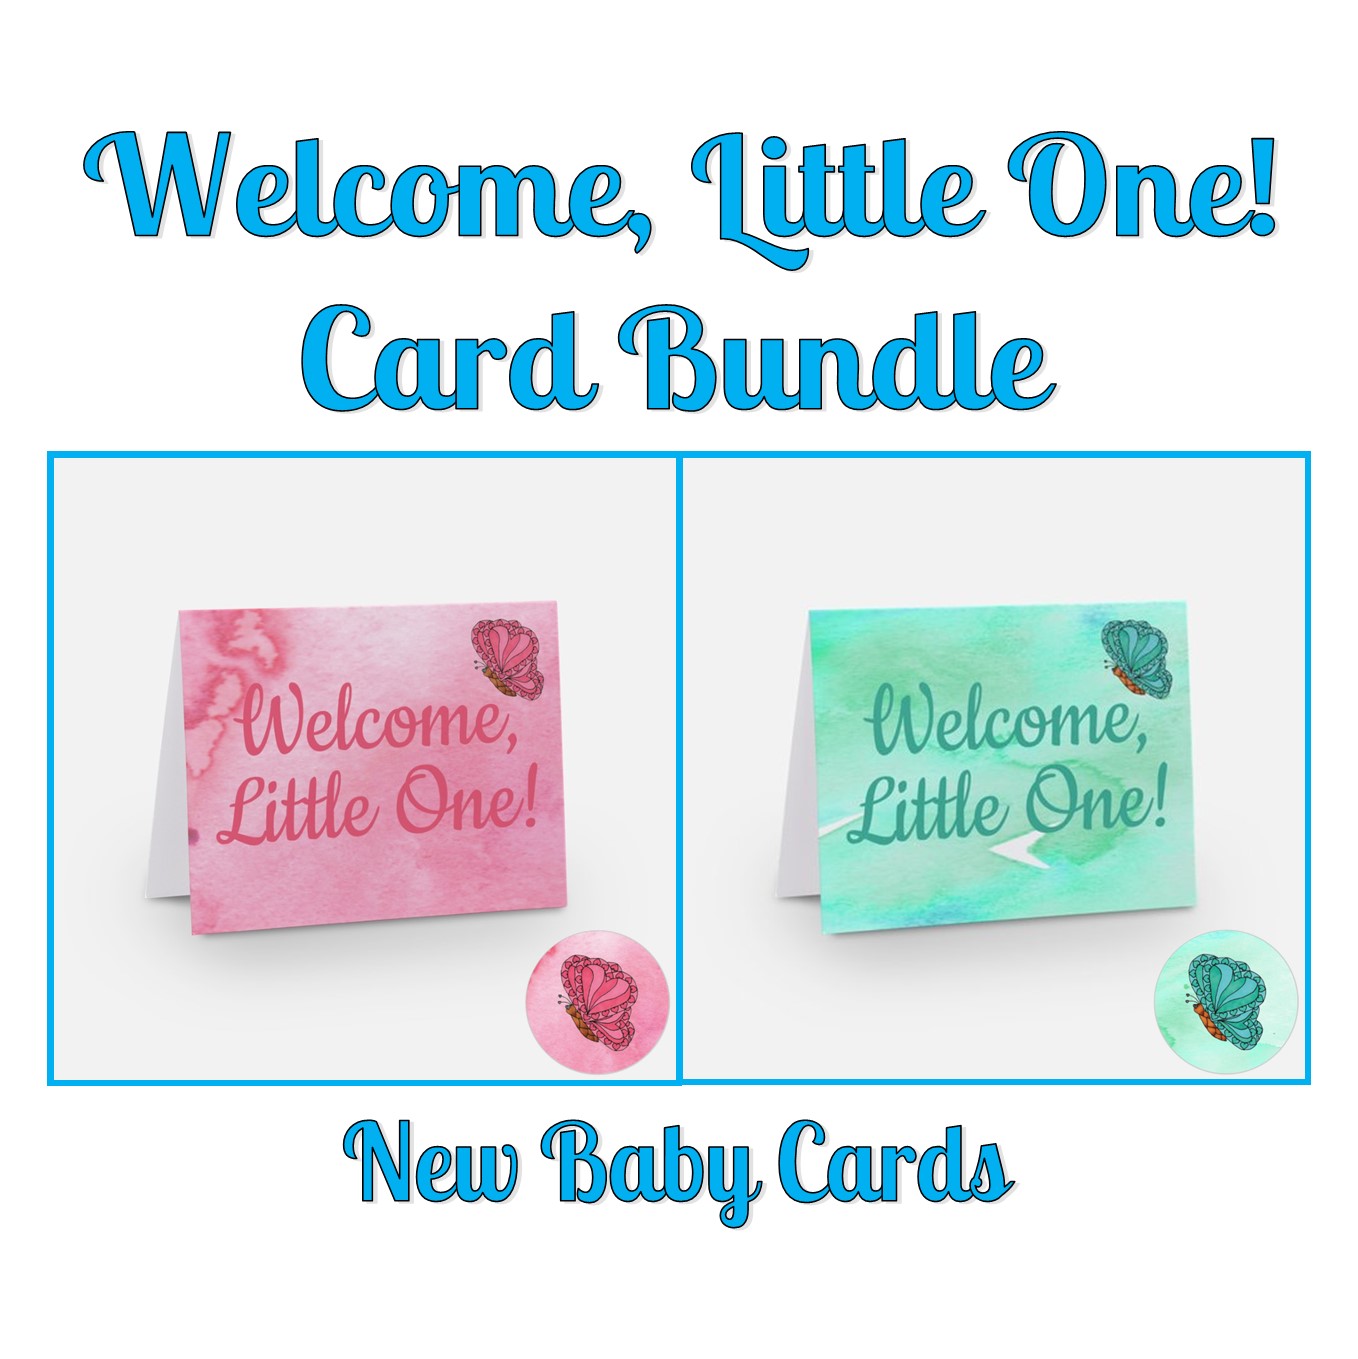 Cards - Baby - Welcome Baby Card for New Baby or Baby Shower - Teal/Green Heart Butterfly Baby Card (Stationery & More) (Literacy Project) (Snail Mail)